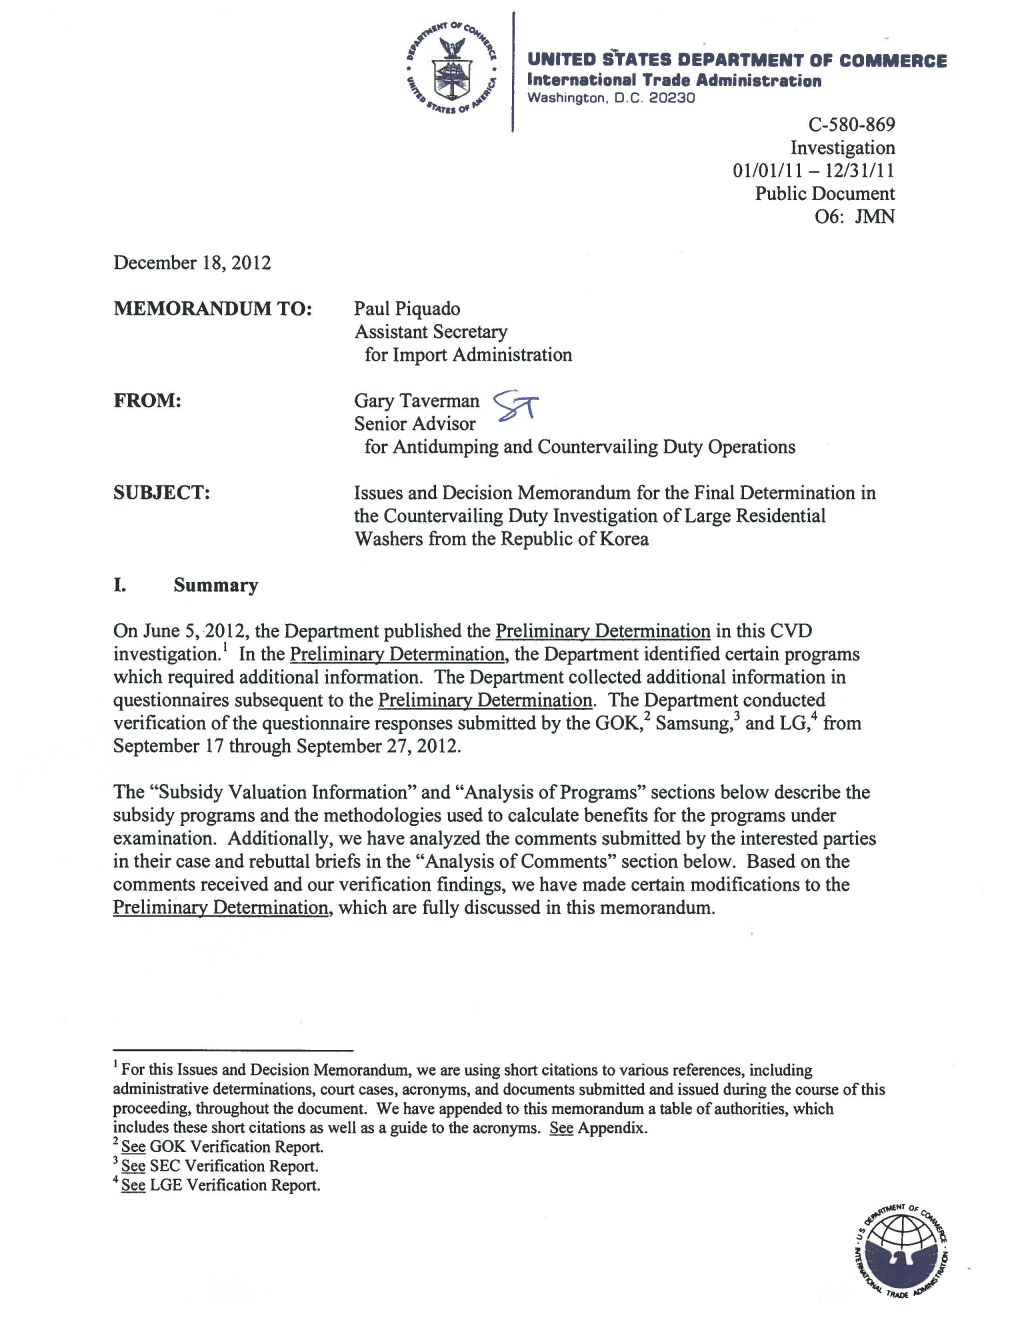 Issues and Decision Memorandum for the Final Determination in the Countervailing Duty Investigation of Large Residential Washers from the Republic Ofkorea